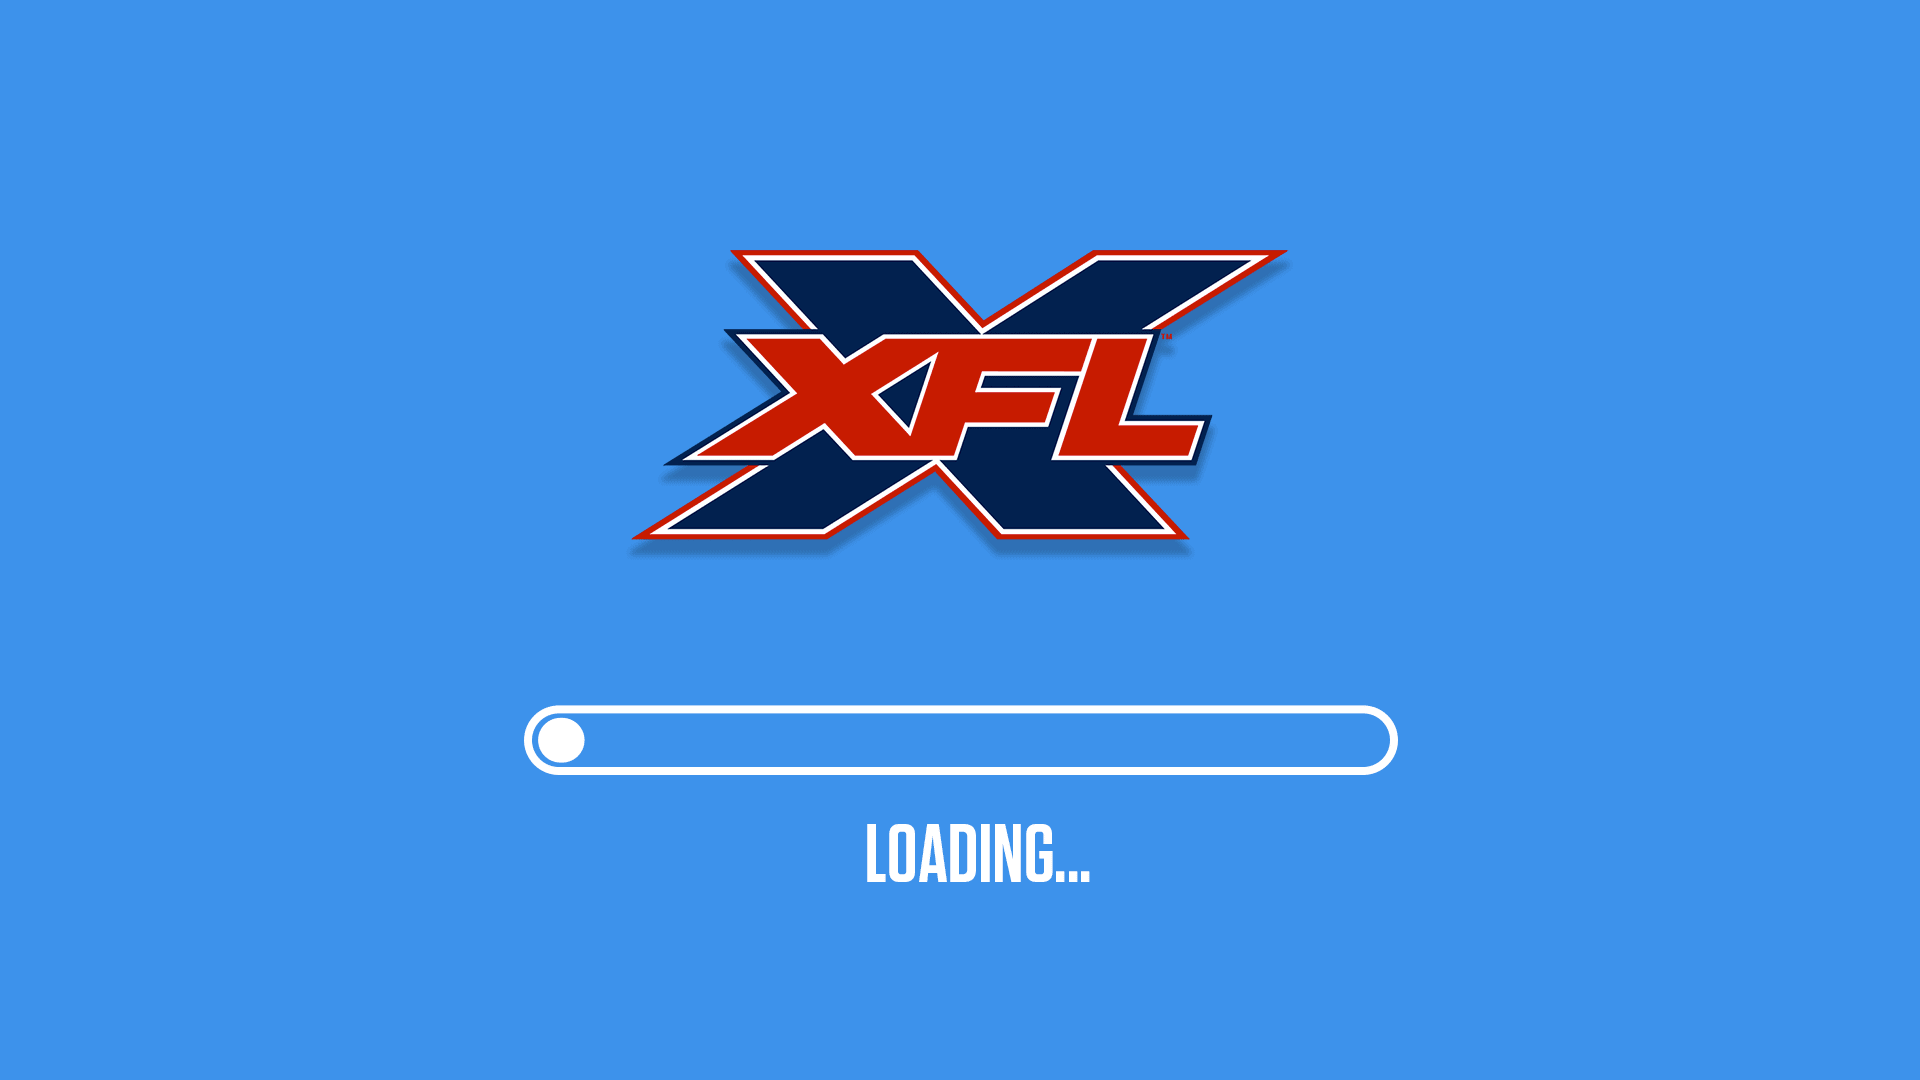 Animated illustration of a loading screen with the XFL logo